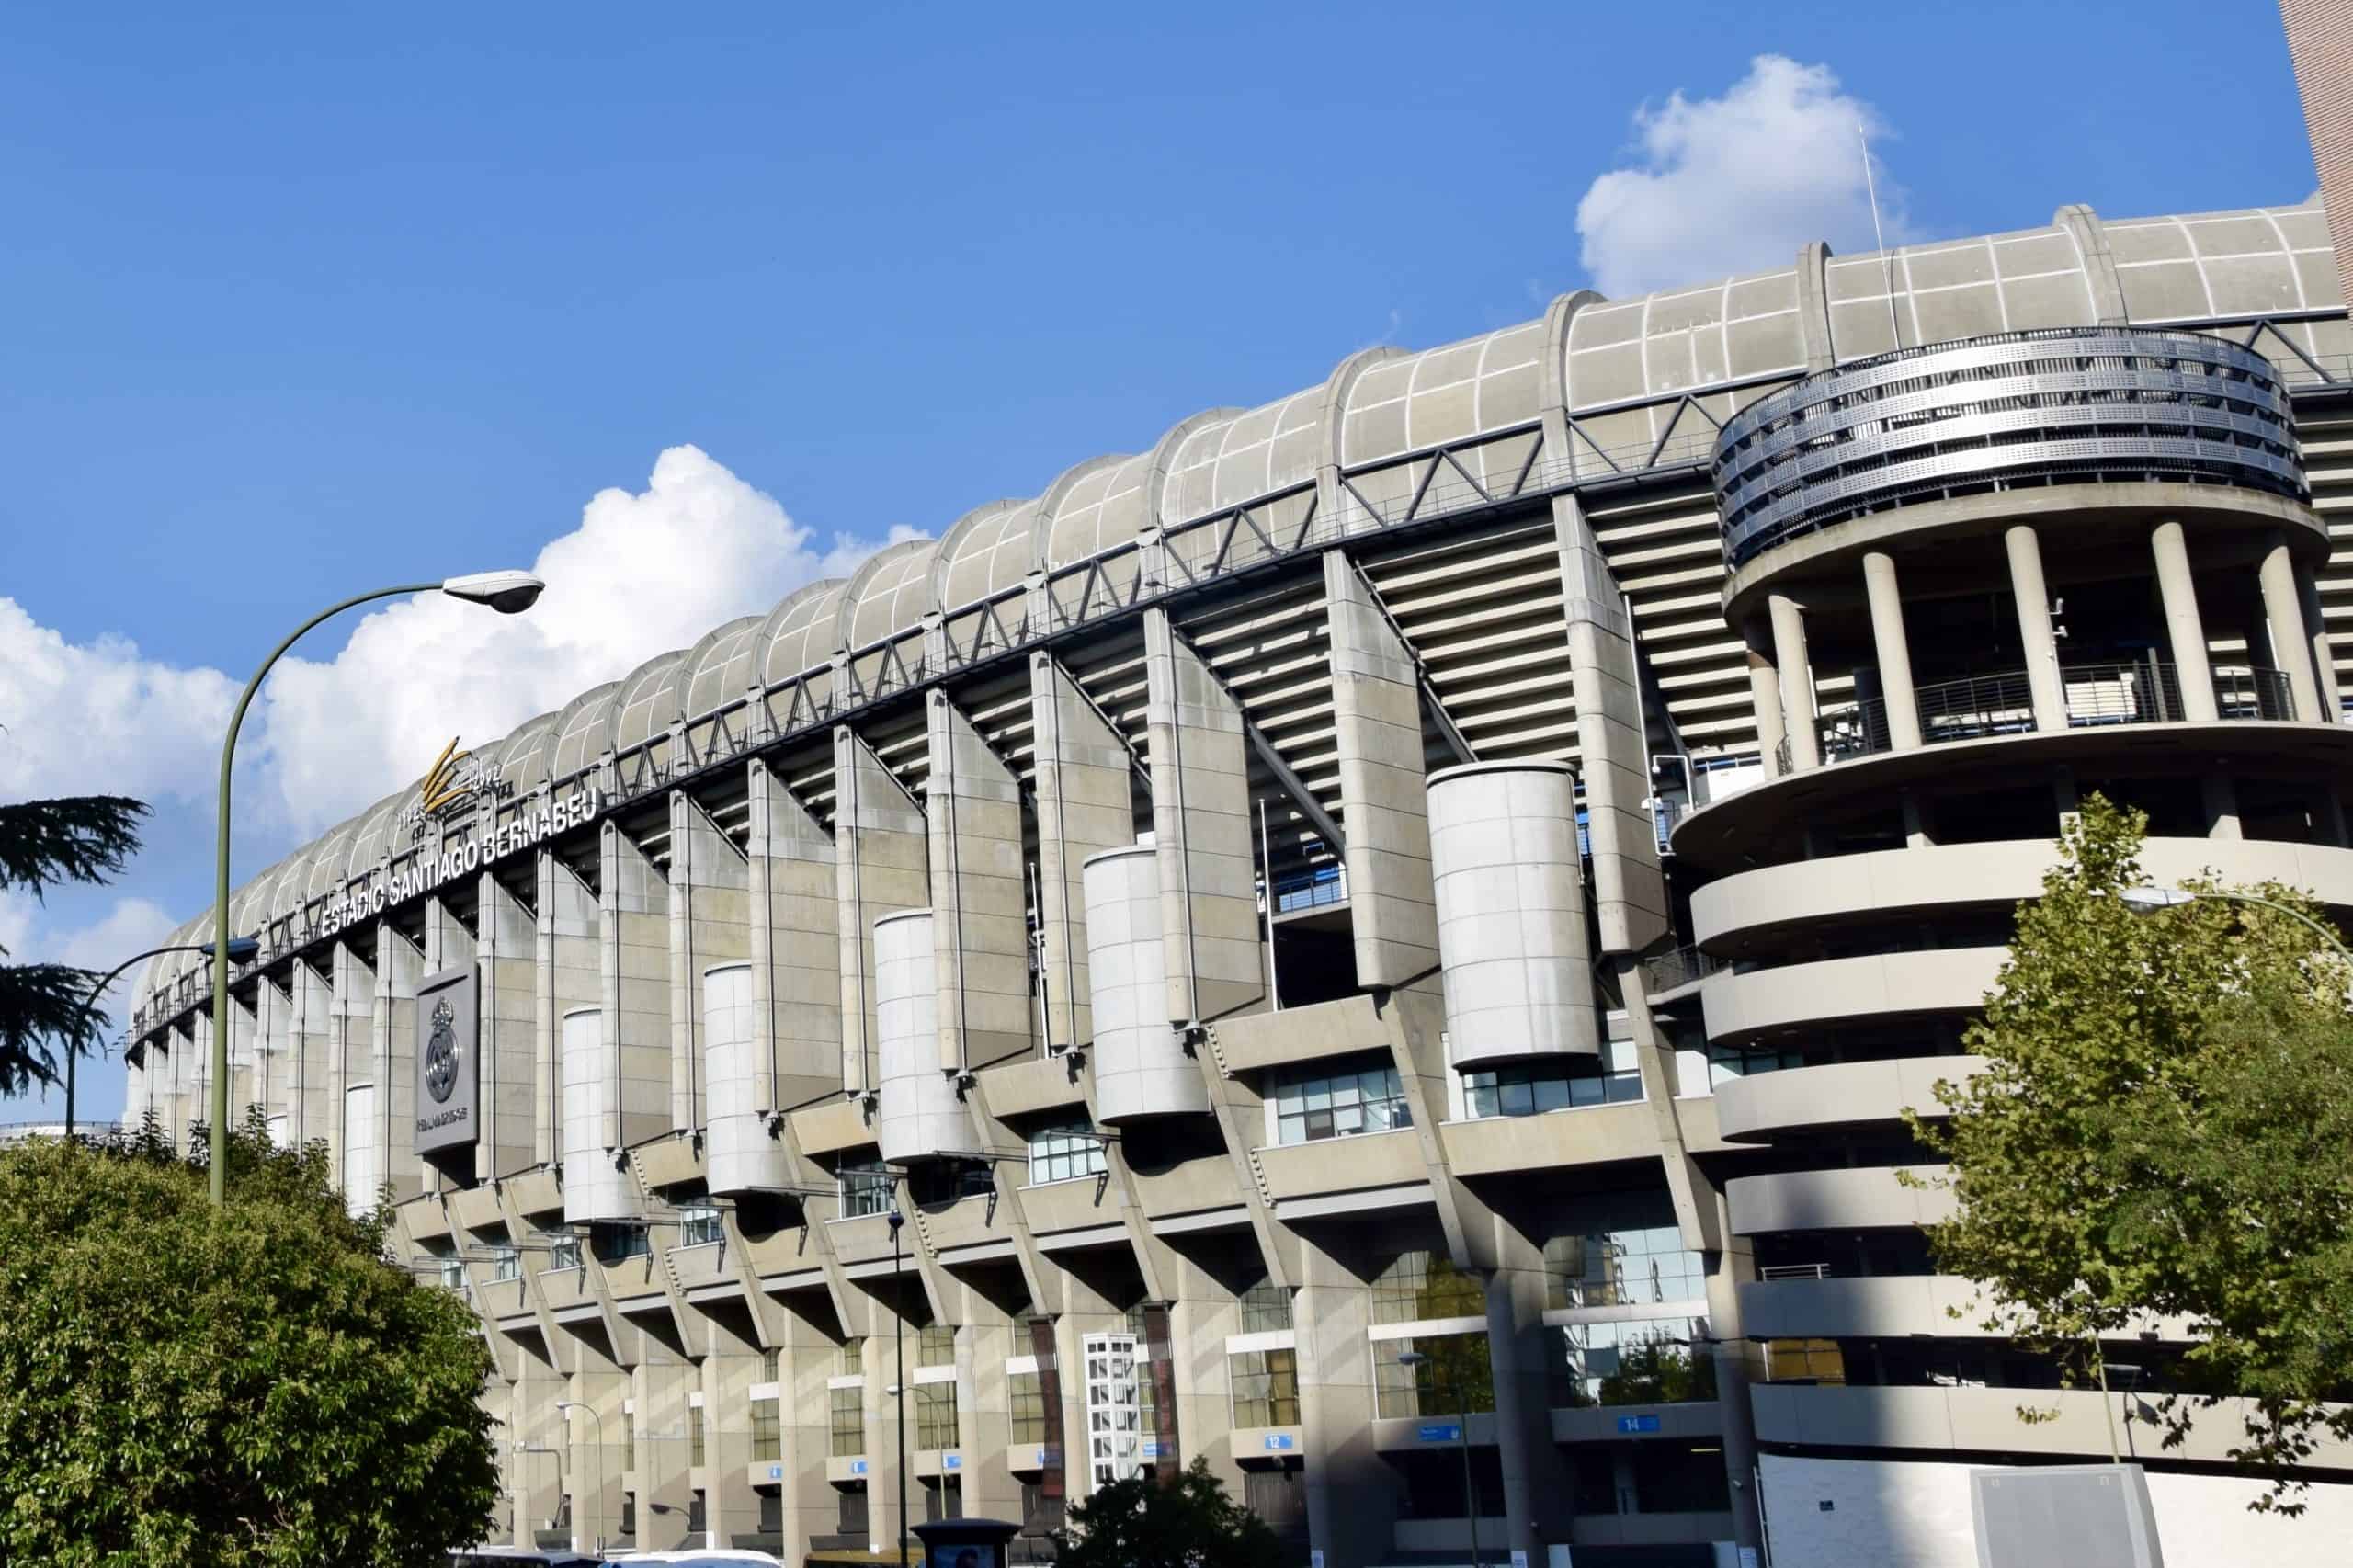 <p><strong>Year Construction Began:</strong> 1945</p>    <p><strong>Construction Completion:</strong> 1947</p>    <p>Situated in Madrid, the capital and largest city of Spain, Santiago Bernabéu Stadium is the second-largest stadium in Spain and the sixth-largest in Europe. </p><p>Remember to scroll up and hit the ‘Follow’ button to keep up with the newest stories from Seattle Travel on your Microsoft Start feed or MSN homepage!</p>